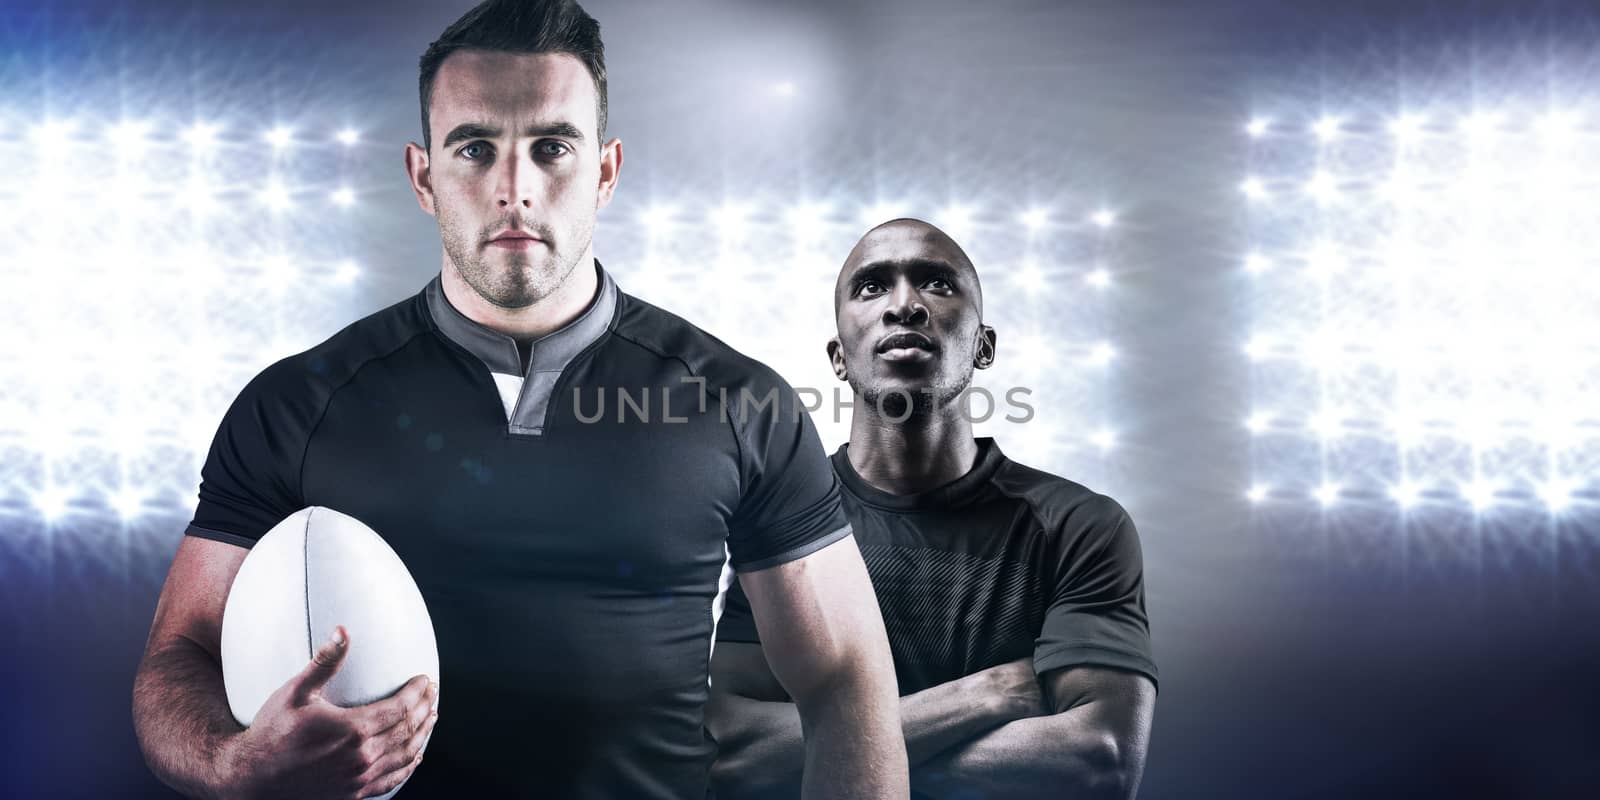 Composite image of tough rugby player holding ball by Wavebreakmedia